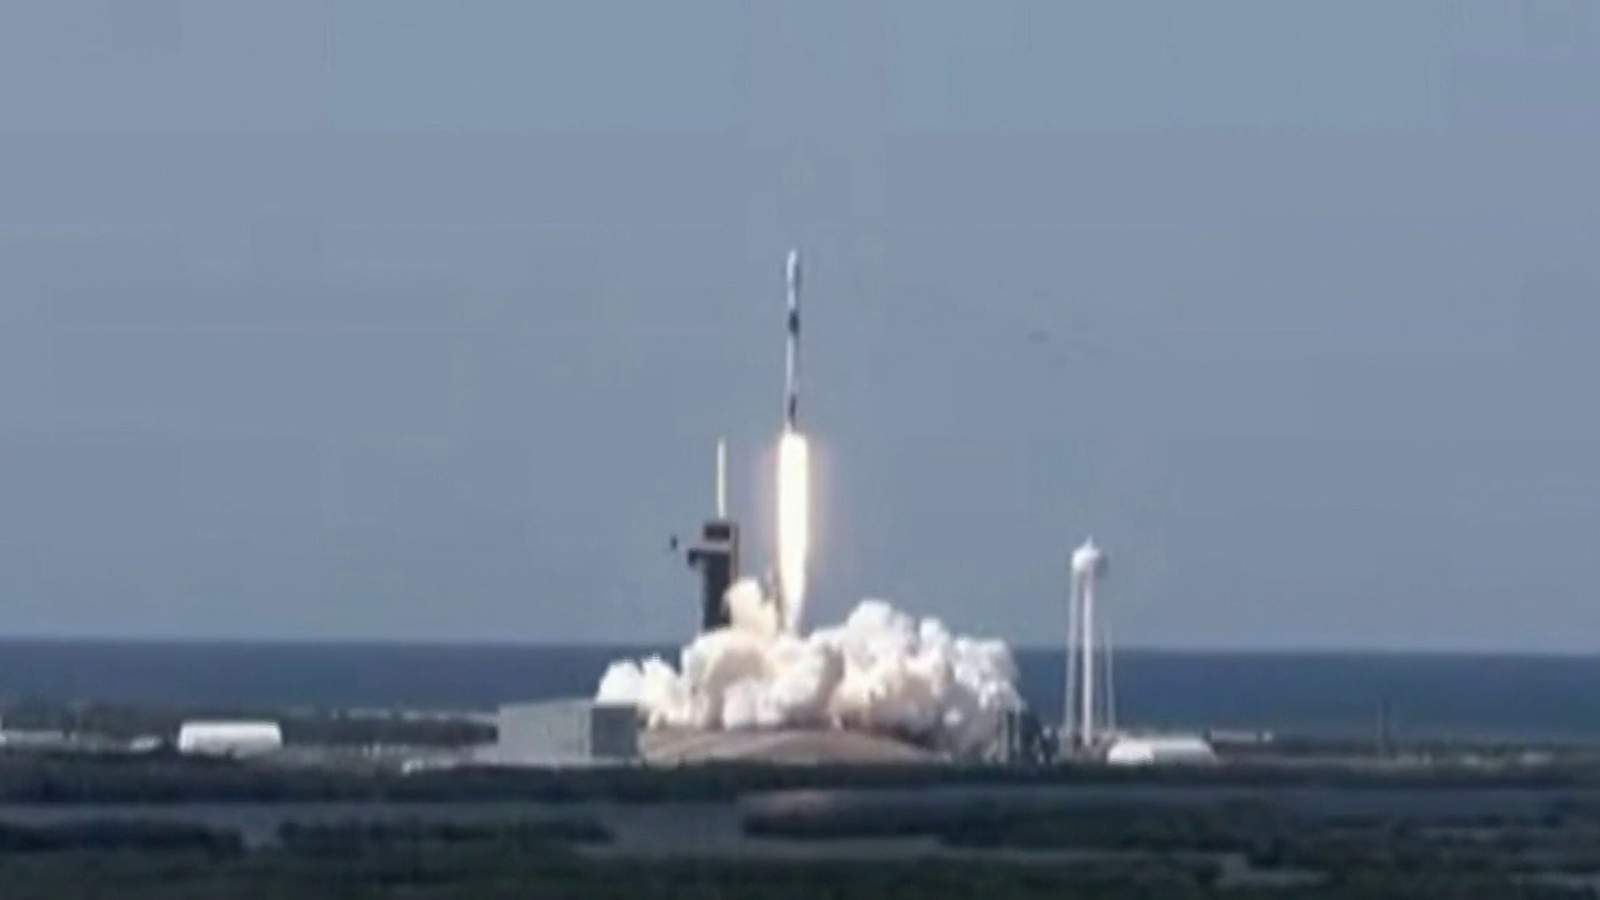 SpaceX launches another round of internet-beaming satellites from Kennedy Space Center